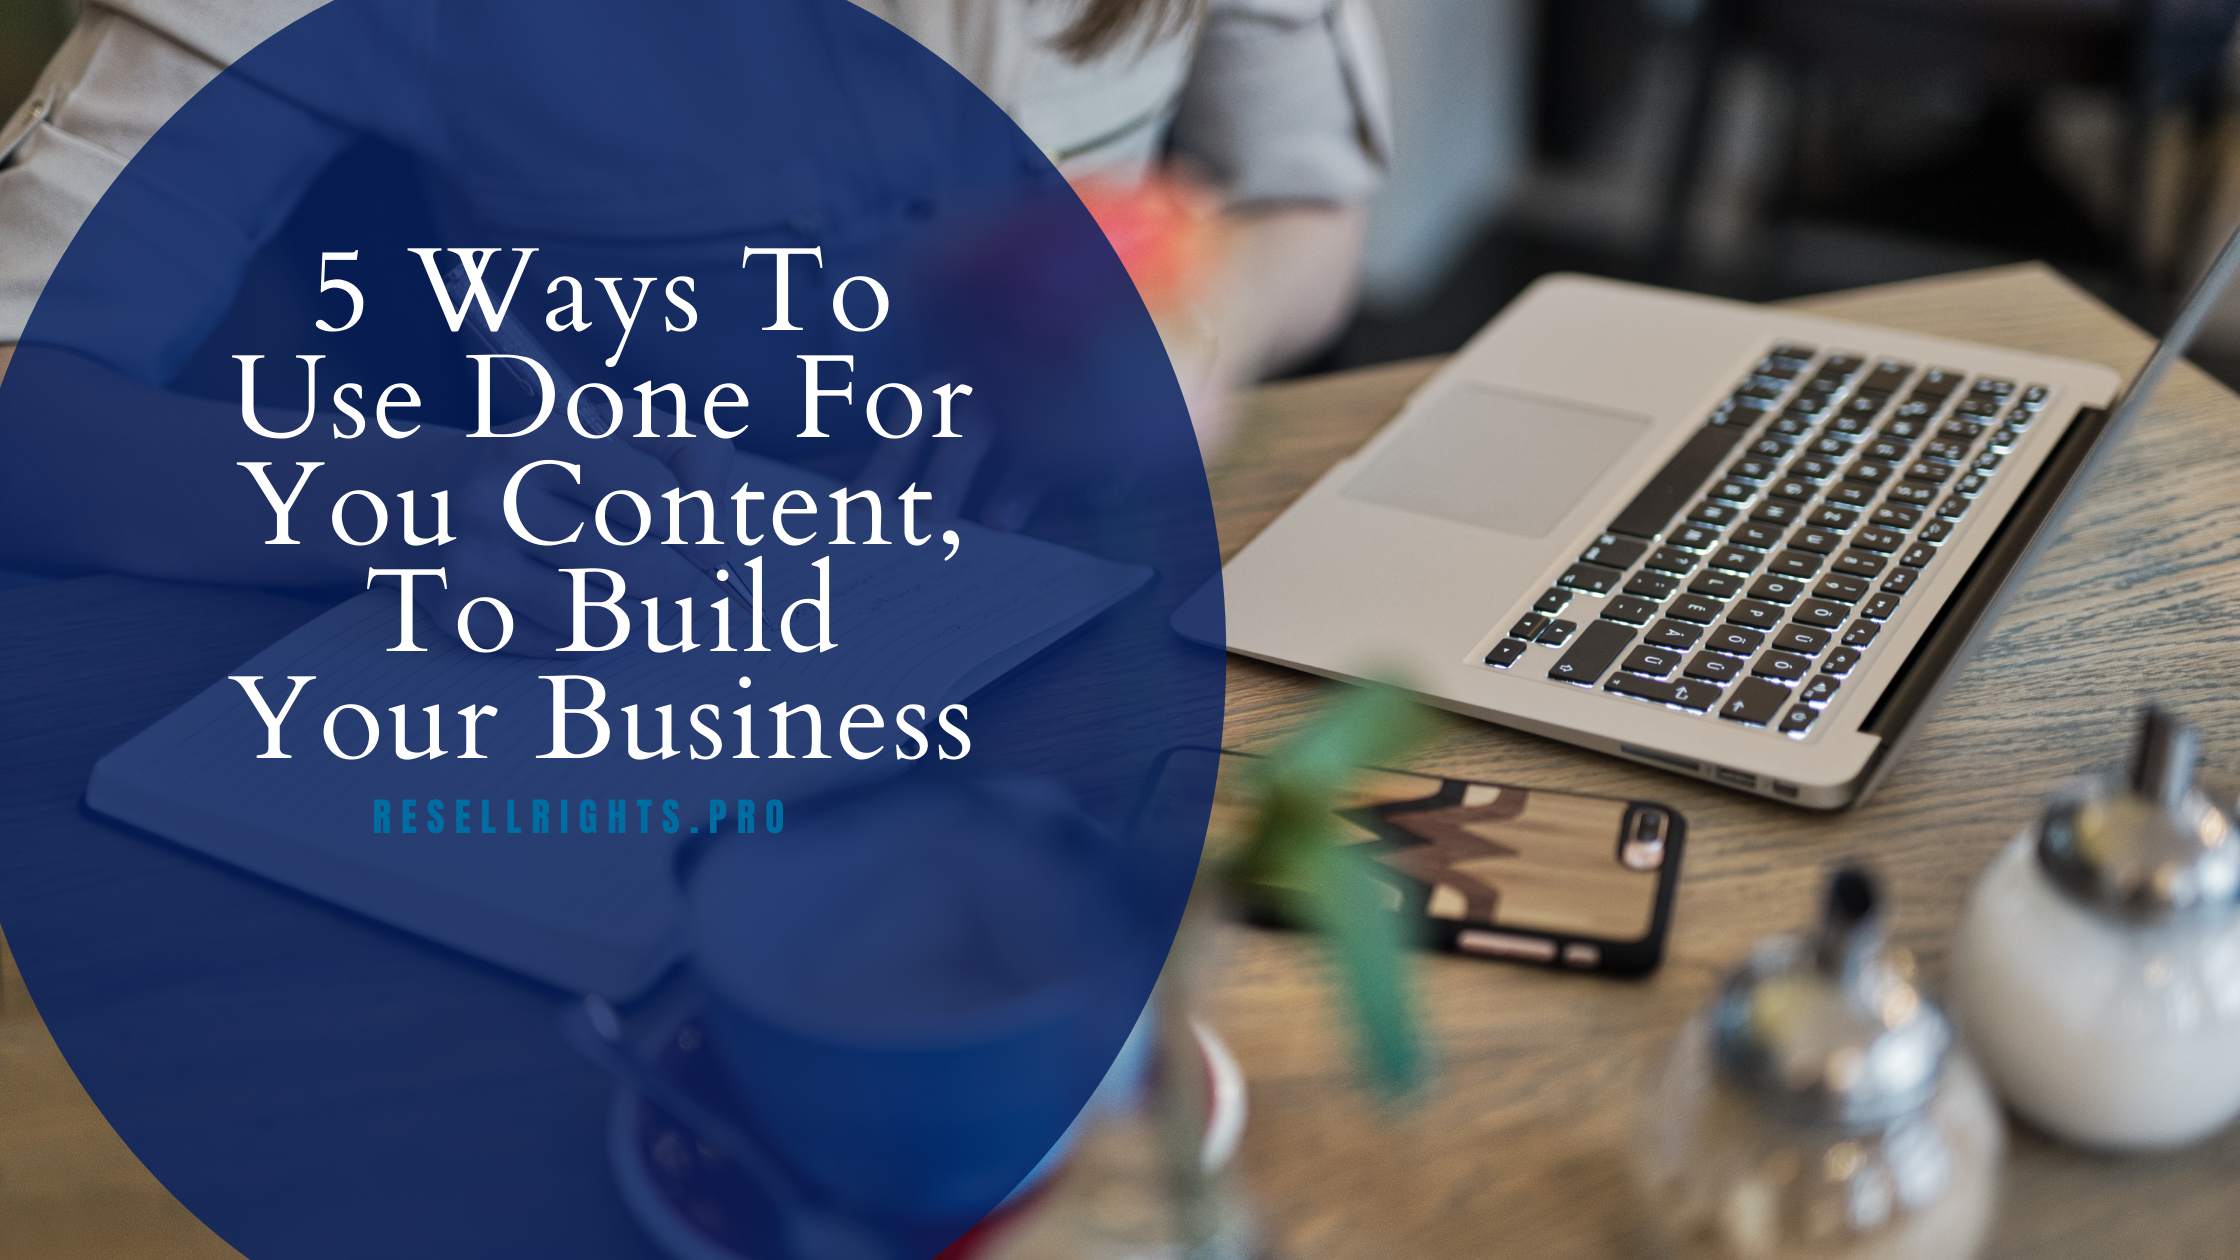 Resell-Rights-Pro-5-Ways-To-Use-Done-For-You-Content-To-Build-Your-Business